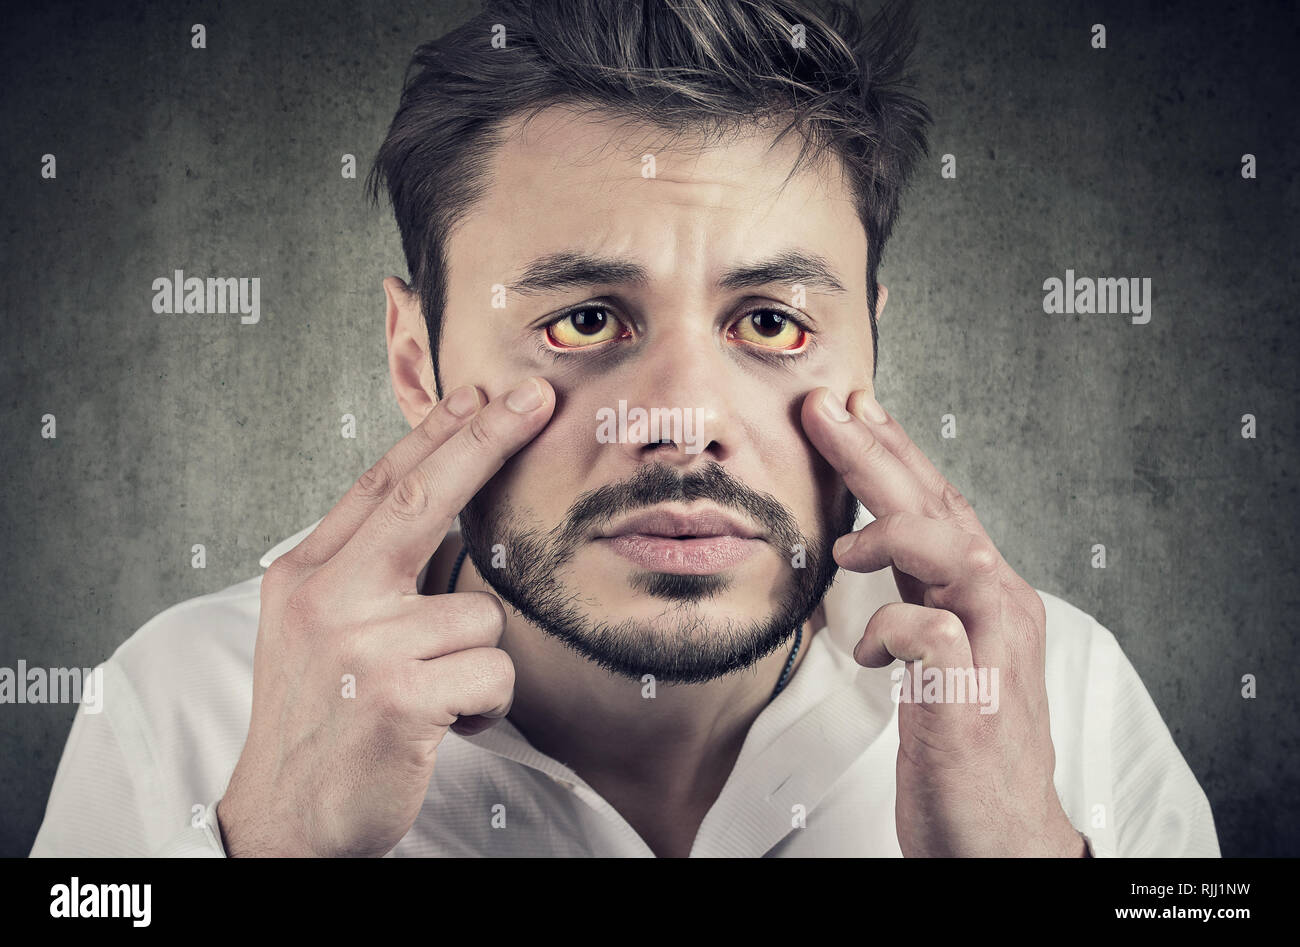 Hepatic disease. Sick man looking in a mirror has yellowish eyes as sign of possible liver infection or other disease. Stock Photo